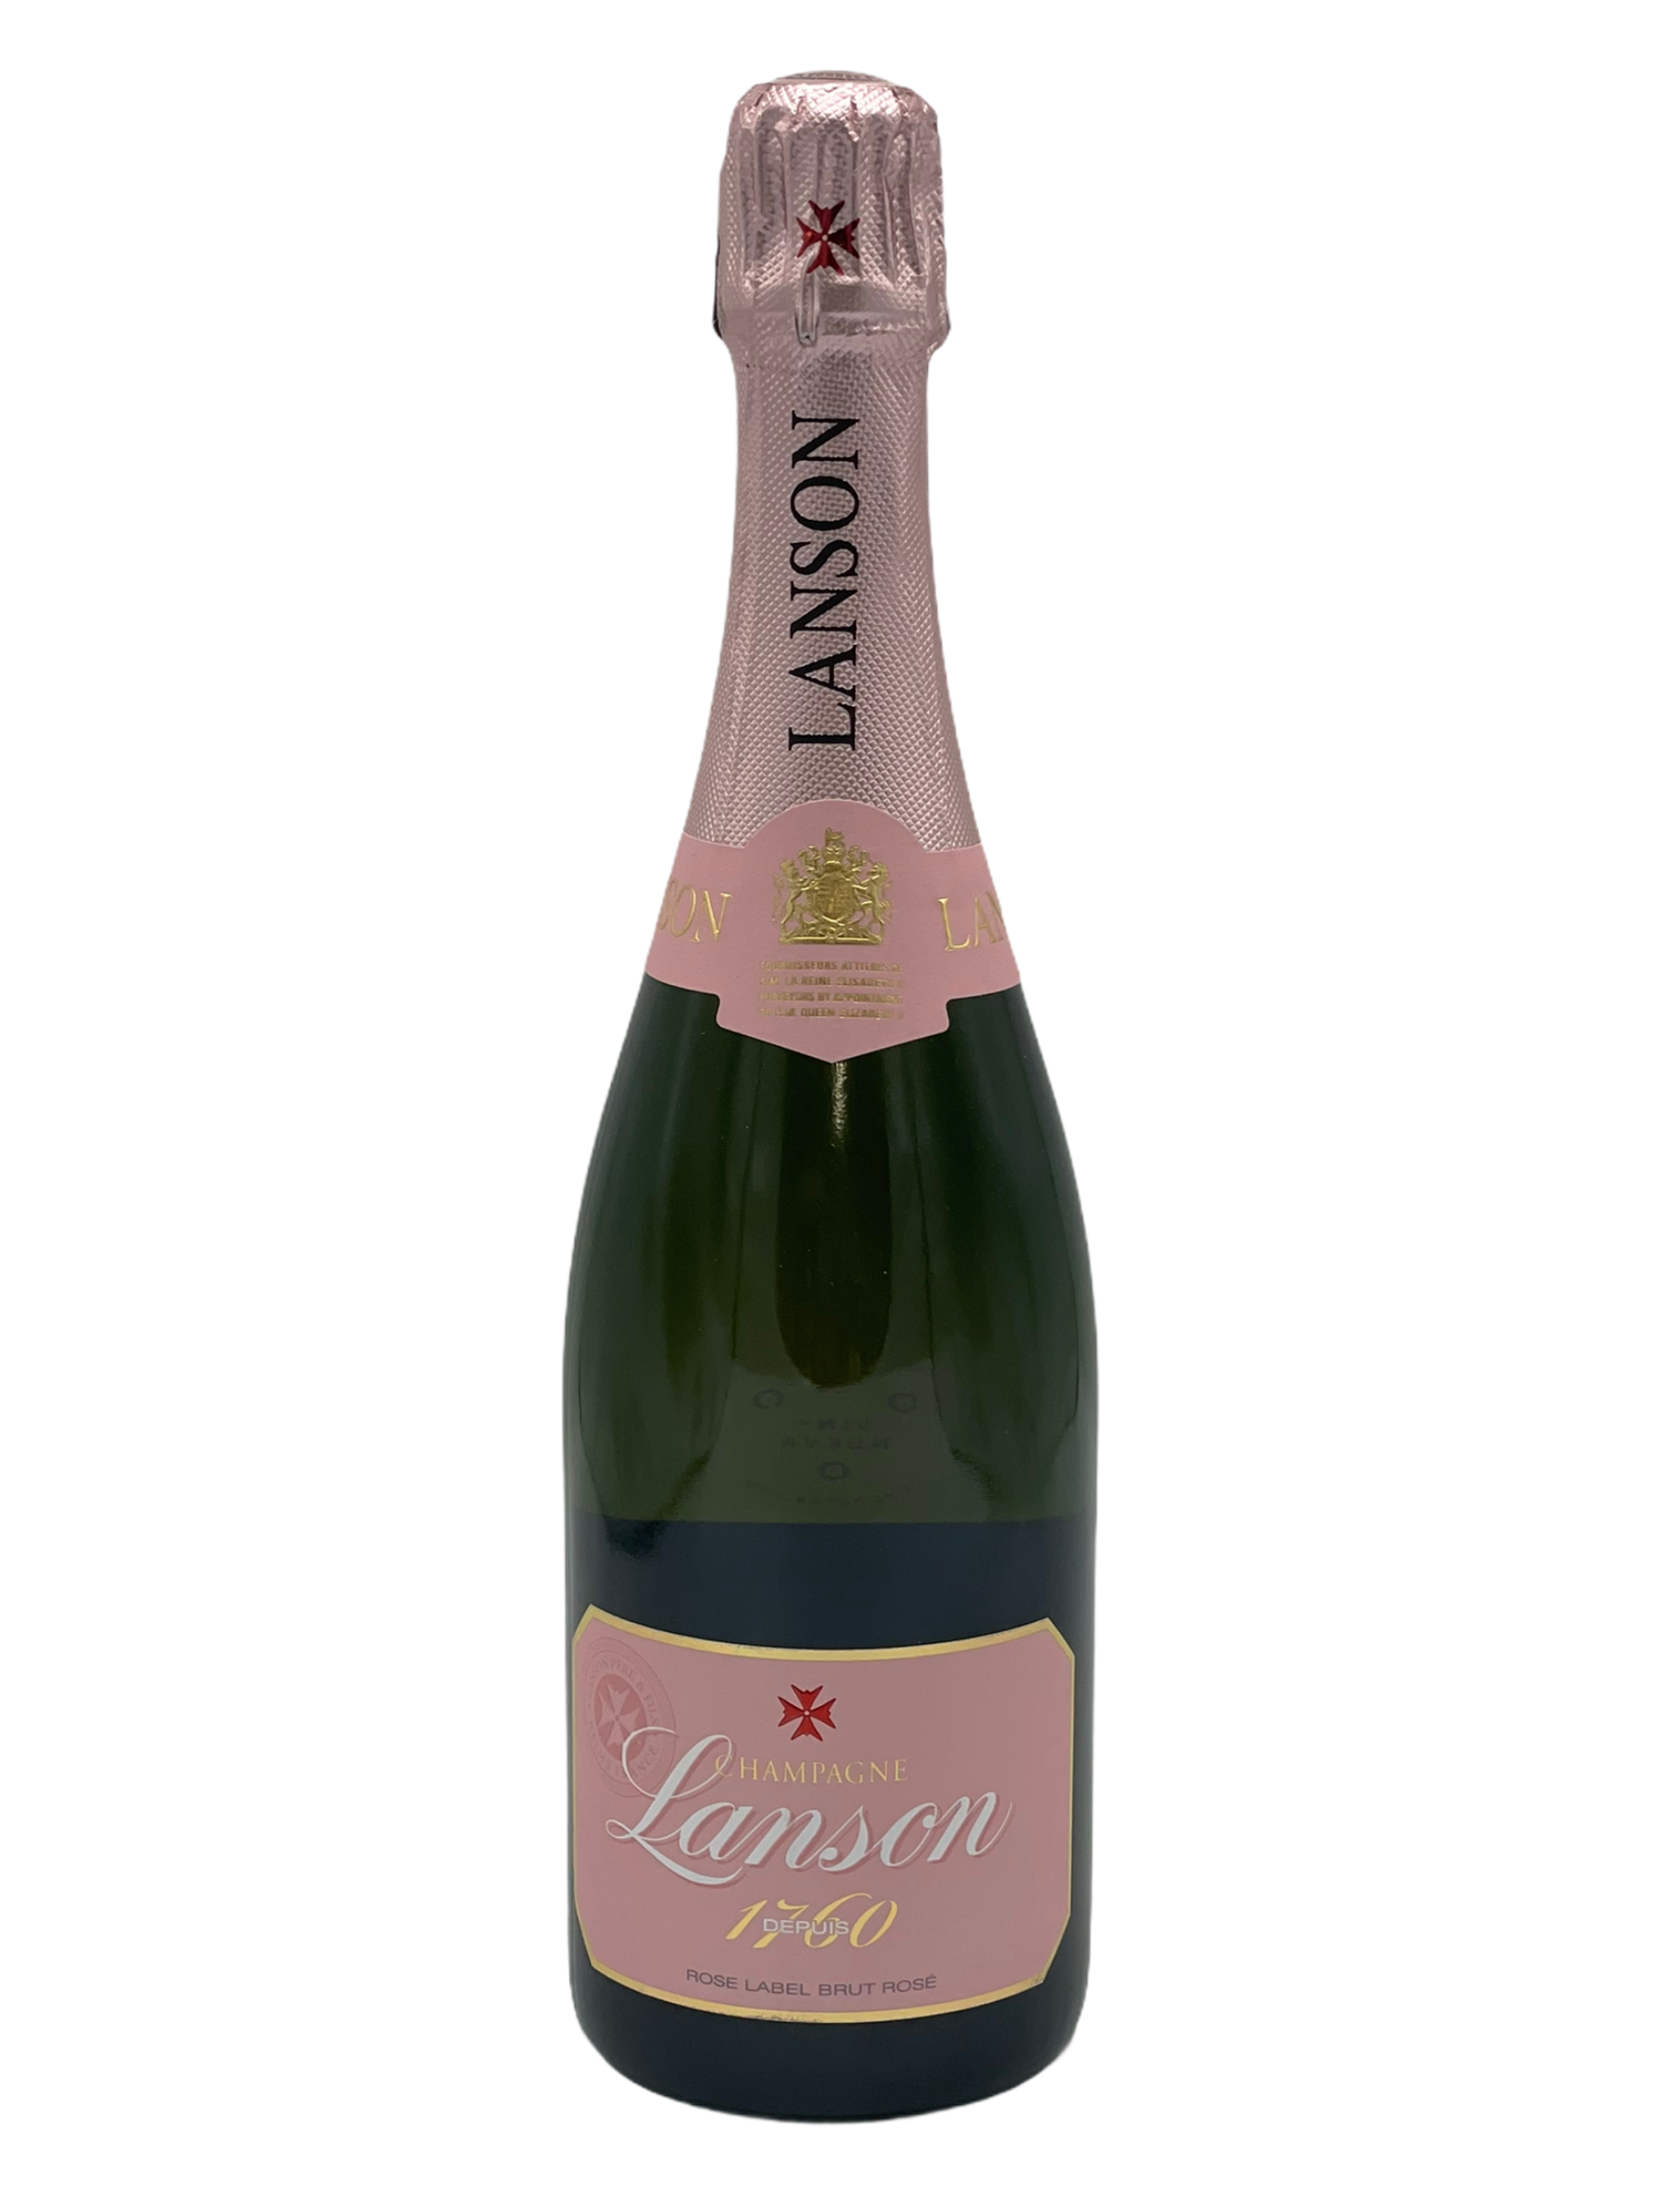 Champagne Louis Roederer Collection 242 NV / 750 ml.